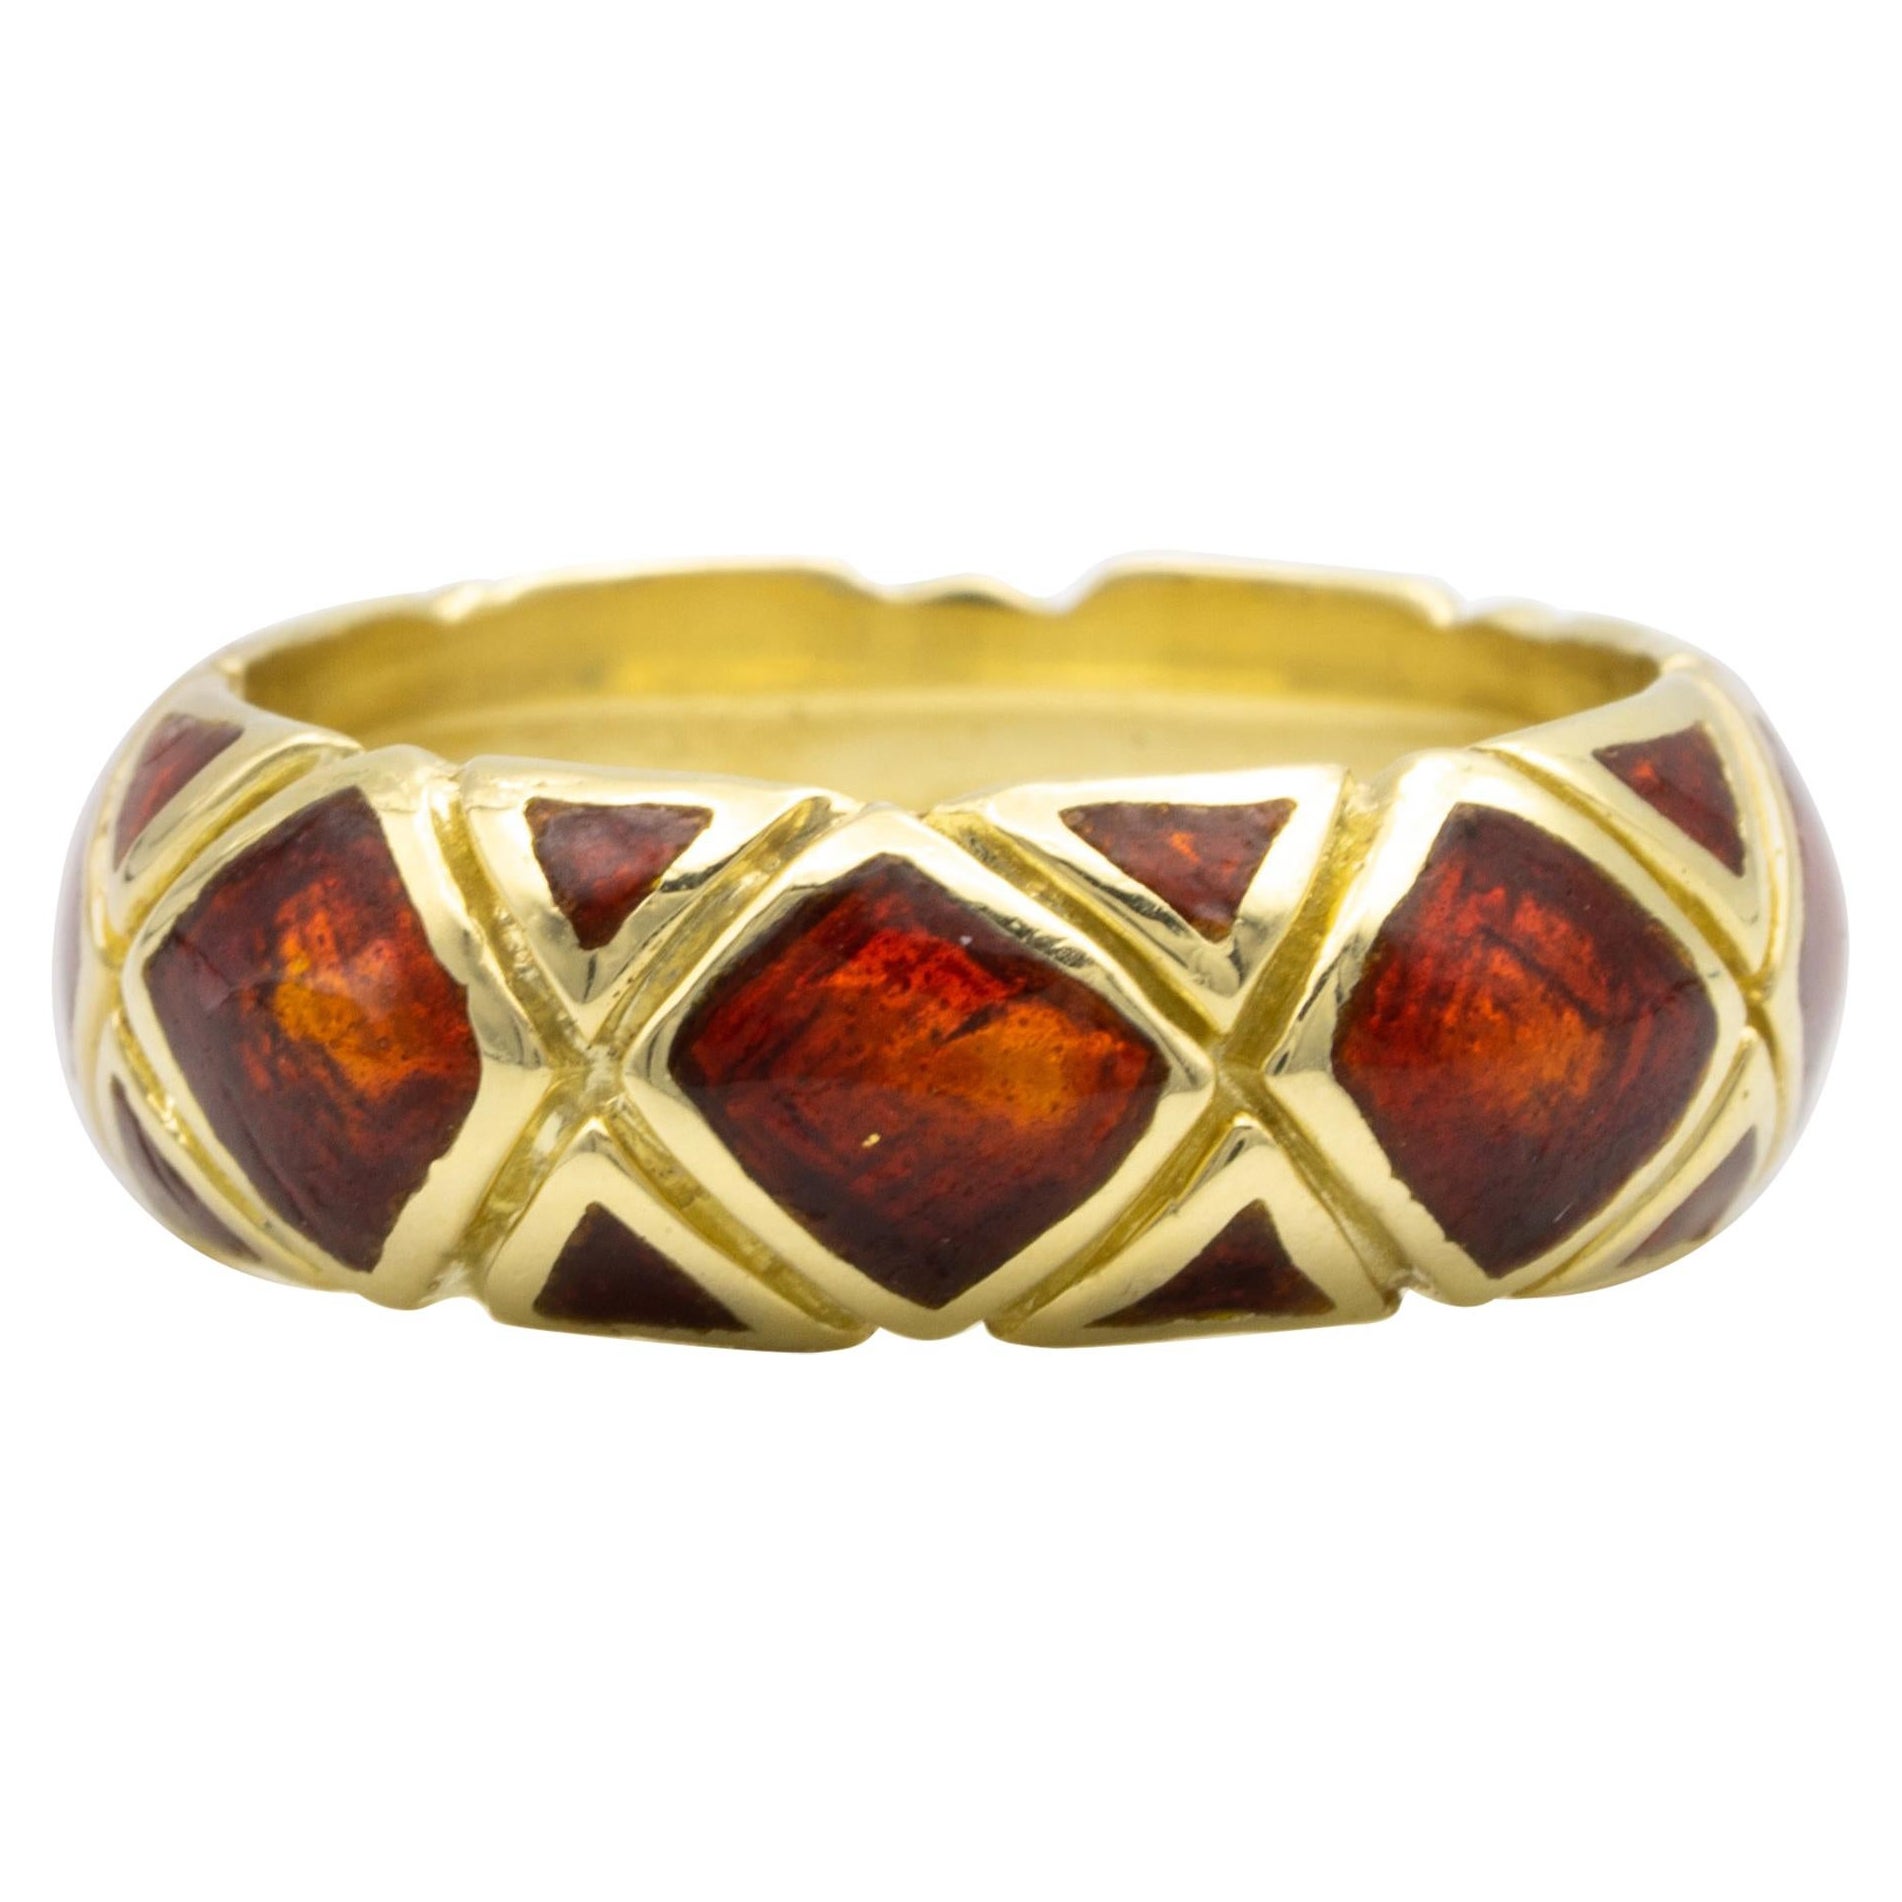 Tiffany & Co.  Vintage ring ,  finely crafted in 18 Karat yellow gold with a red enamel pattern design. Circa 1960's, Domed for a comfort fit.

Brand: Tiffany & Co. 
Ring Size 6 
Width: 6.5 mm 
Signed: TIFFANY  
Stamped: 18K  
Circa 1960's